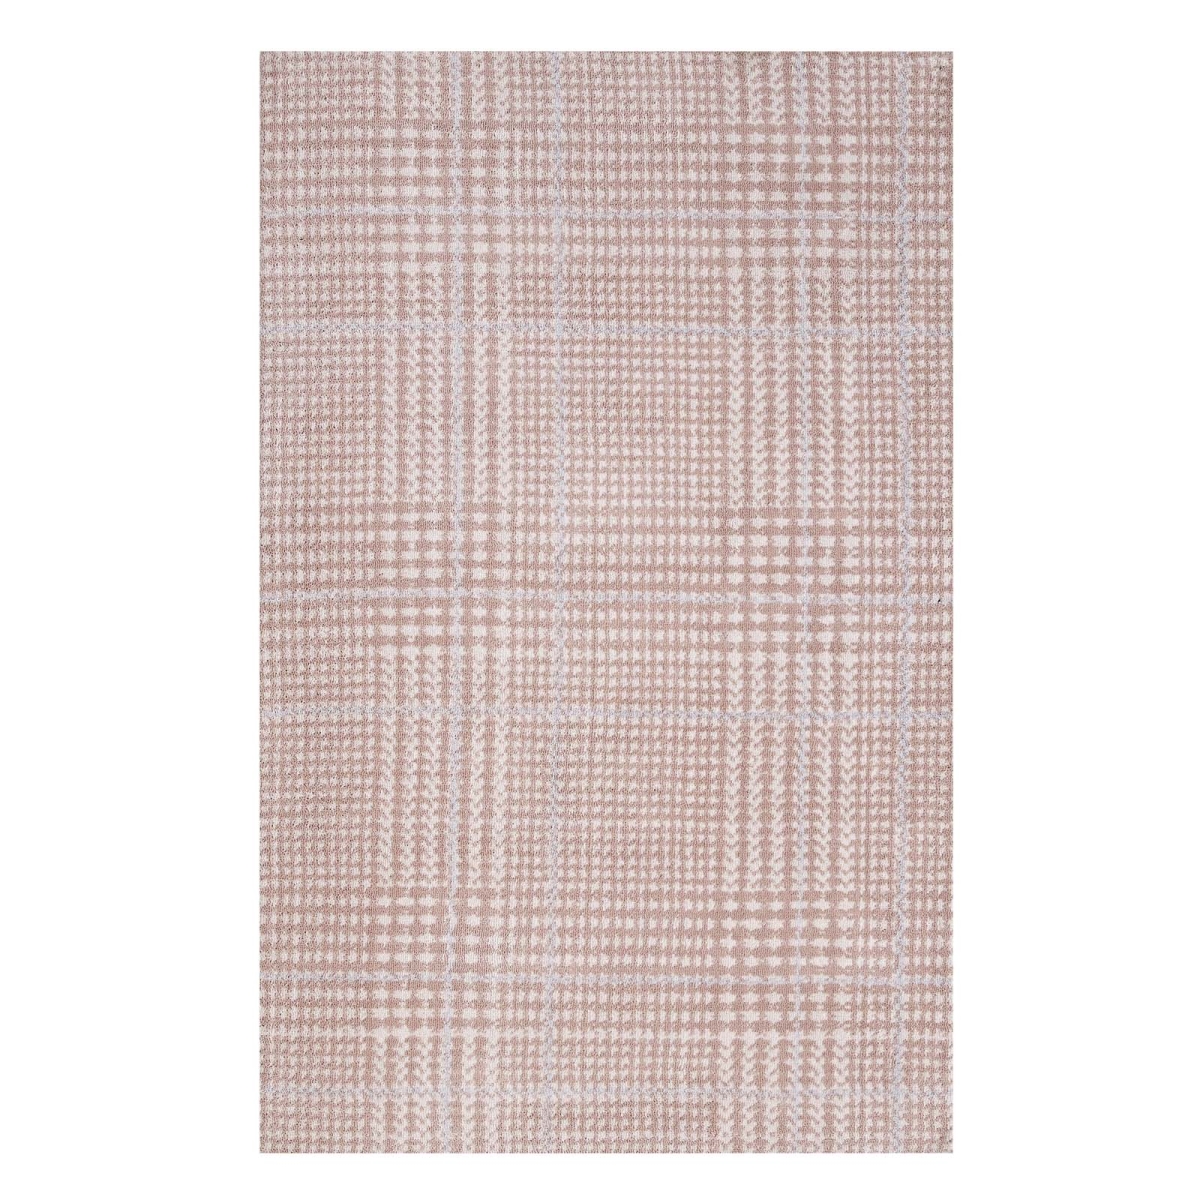 R-1024b-58 5 X 8 Ft. Kaja Abstract Plaid Polyester Area Rug - Ivory, Cameo Rose & Light Blue, 0.5 X 60 X 96 In.